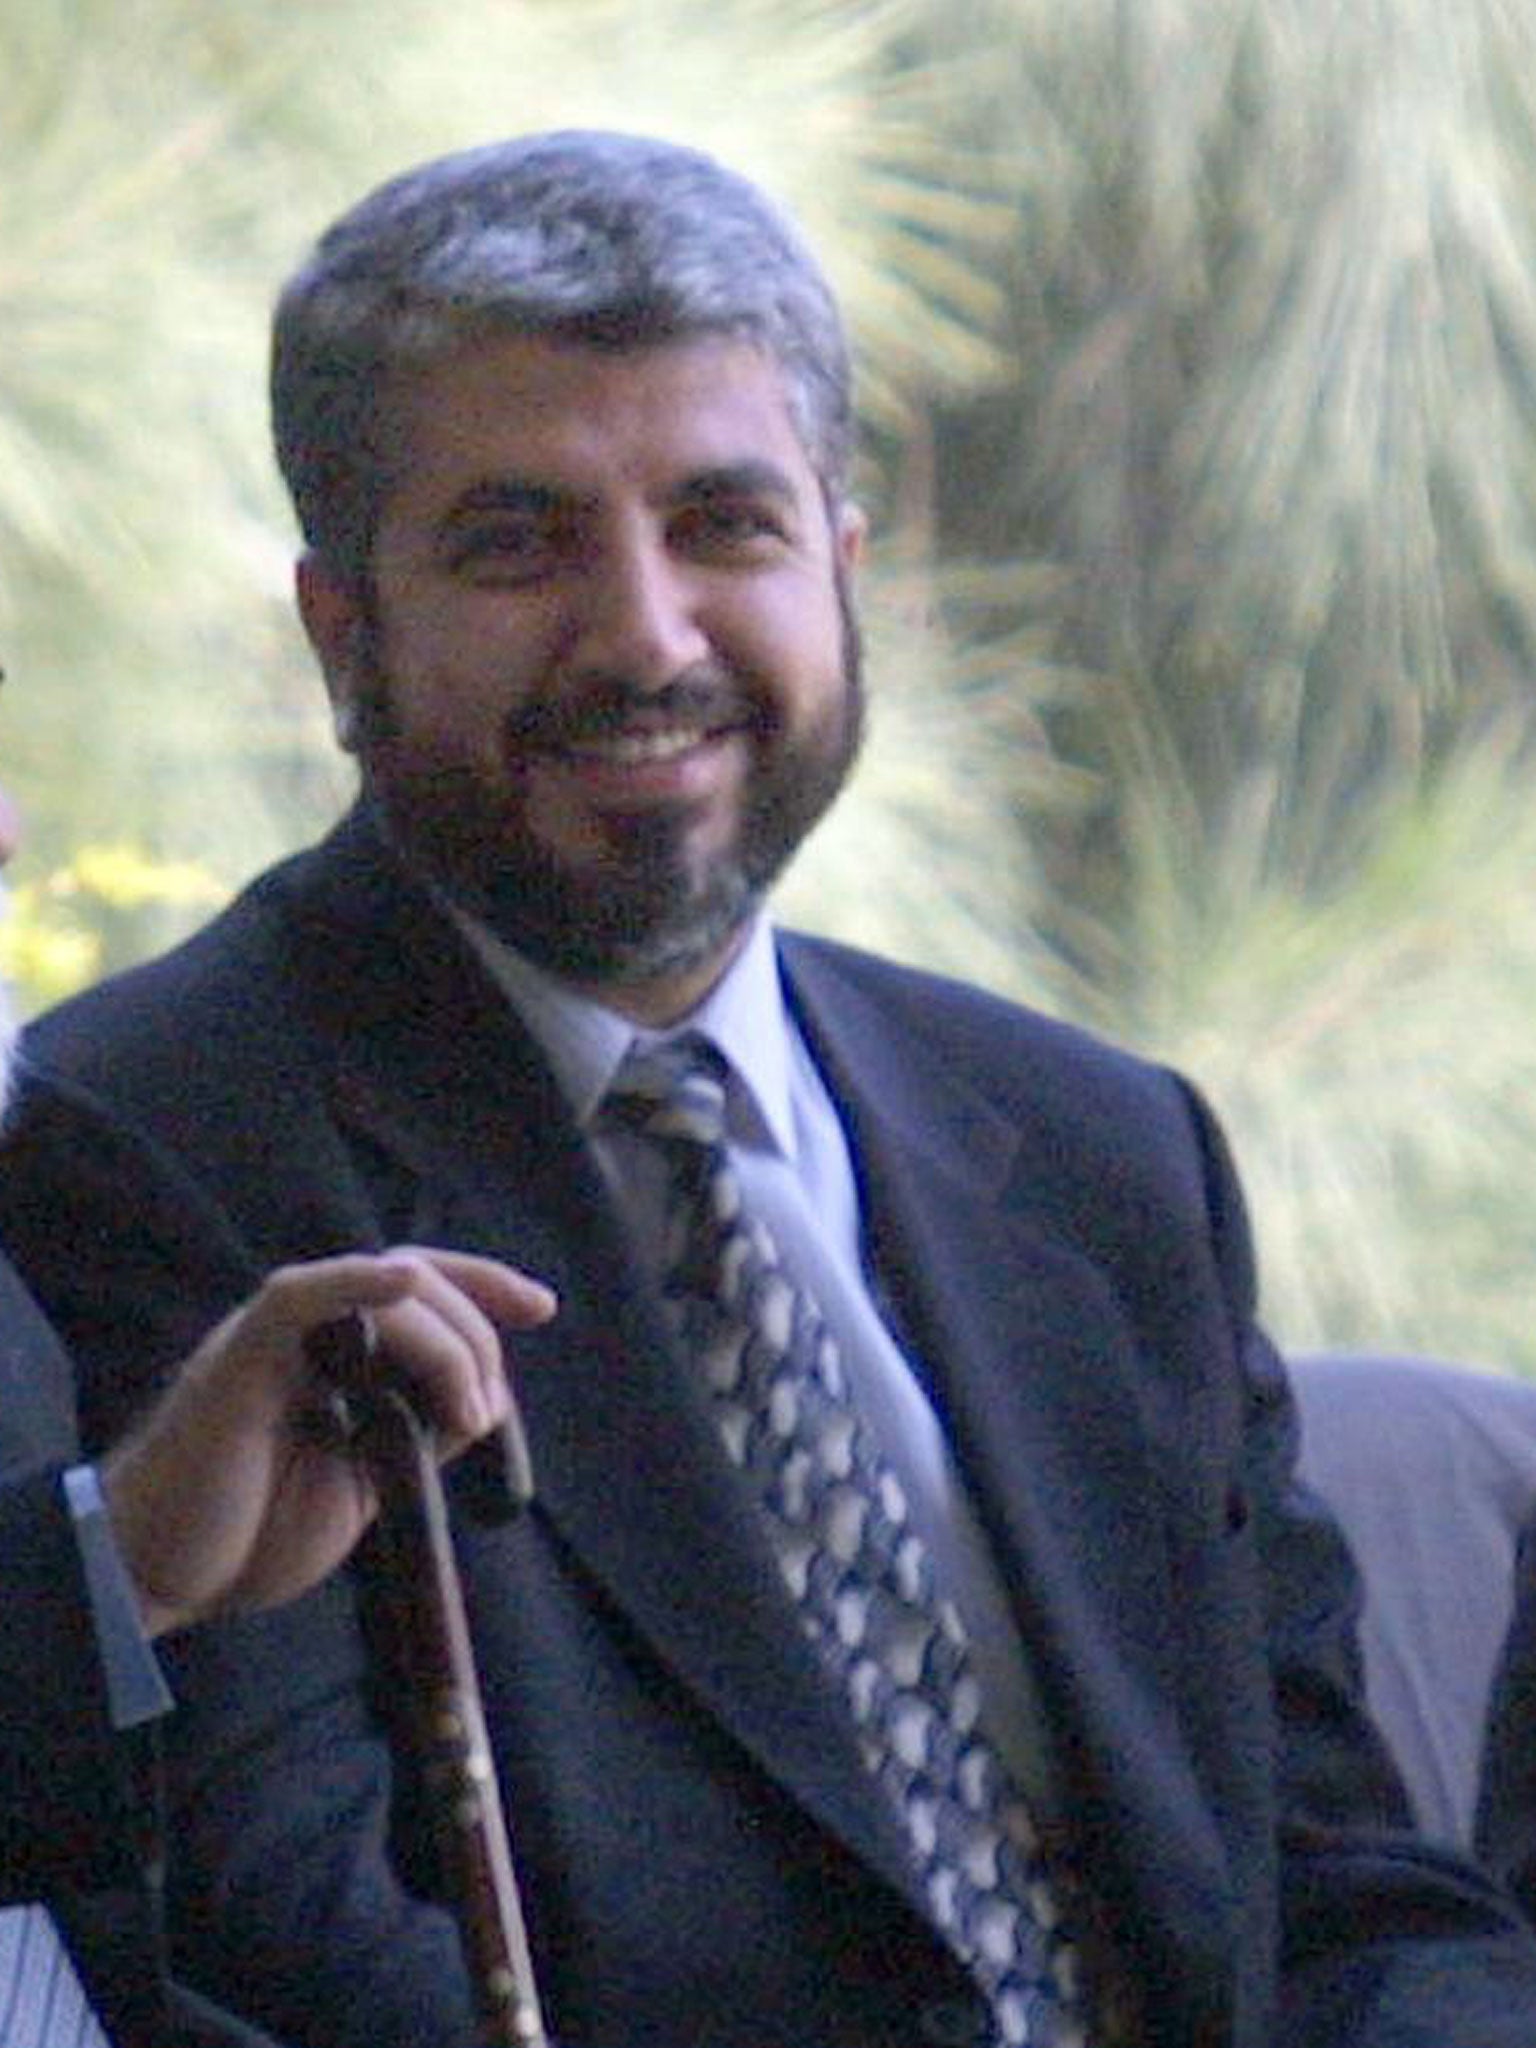 Hamas leader Khaled Meshal says long-stalled elections are being planned